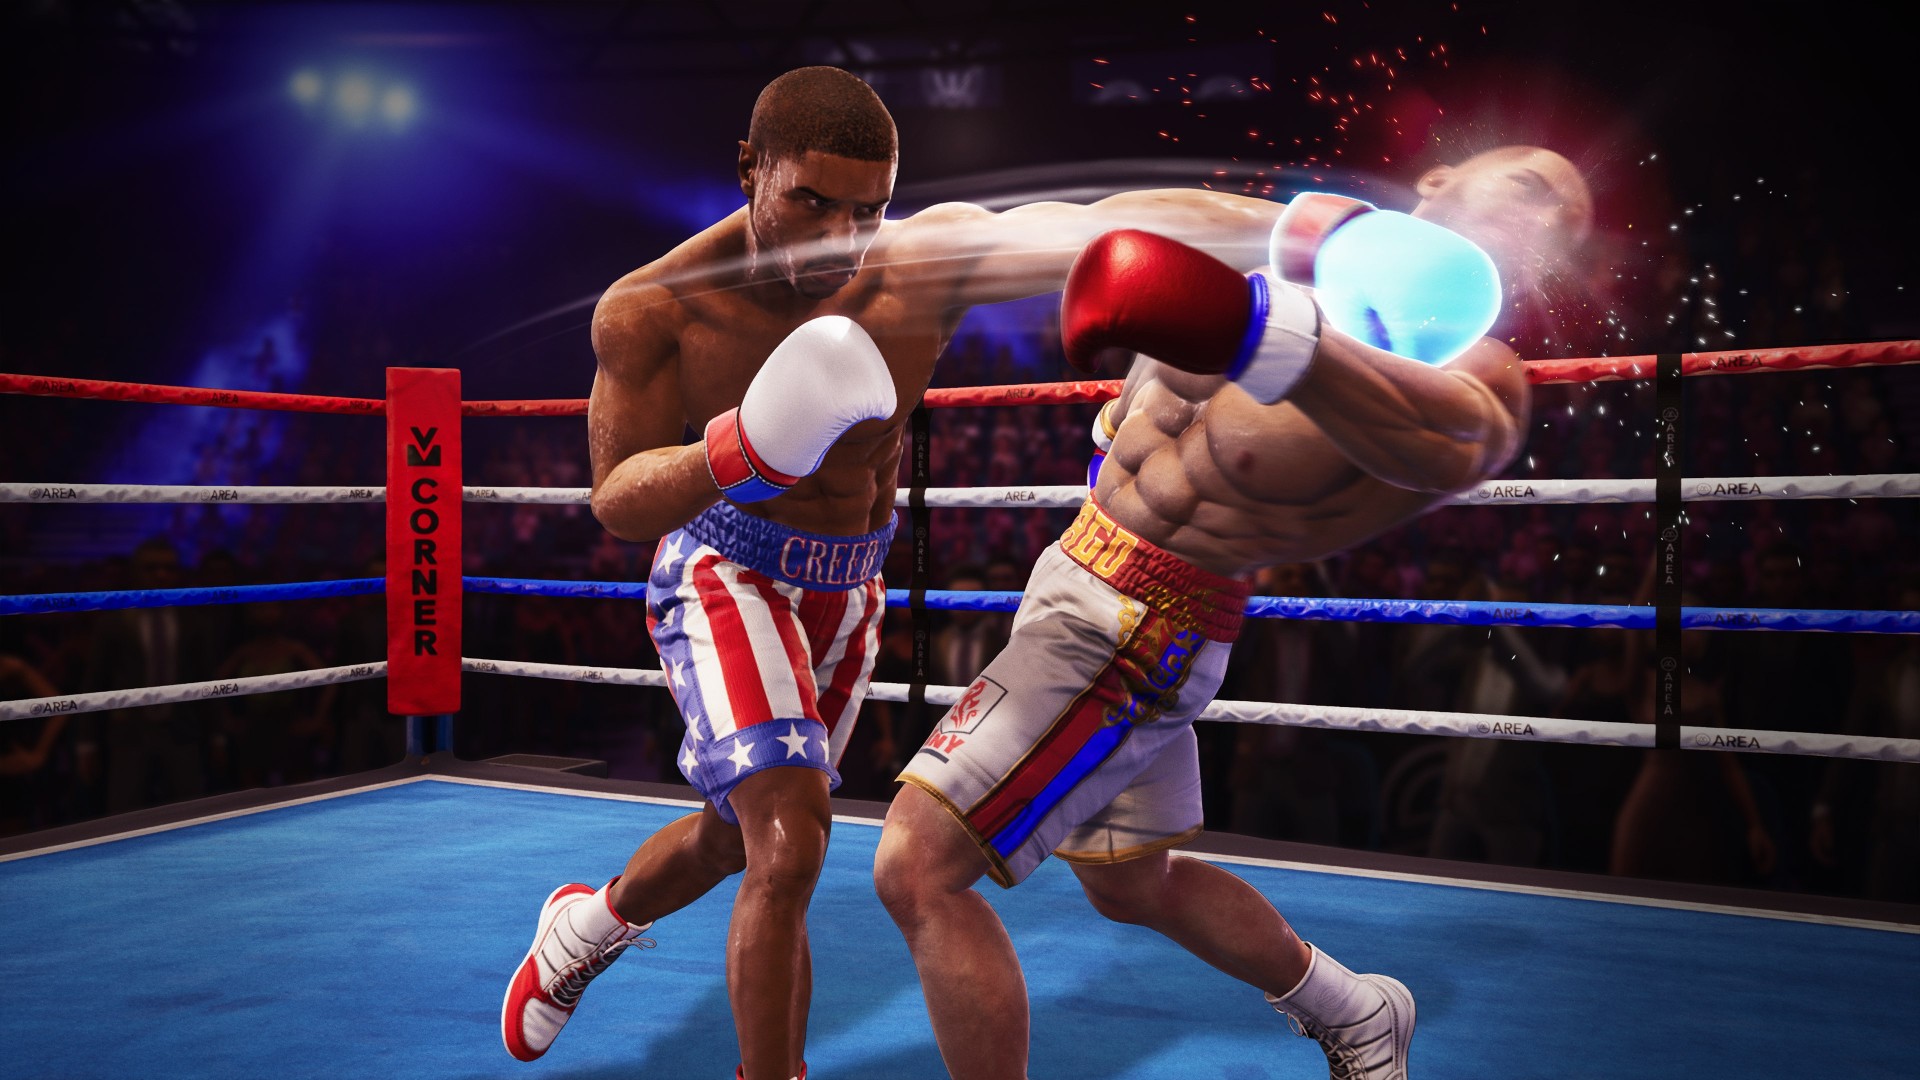 Next Week on Xbox: Neue Spiele vom 30. August bis 3. September: Big Rumble Boxing: Creed Champions